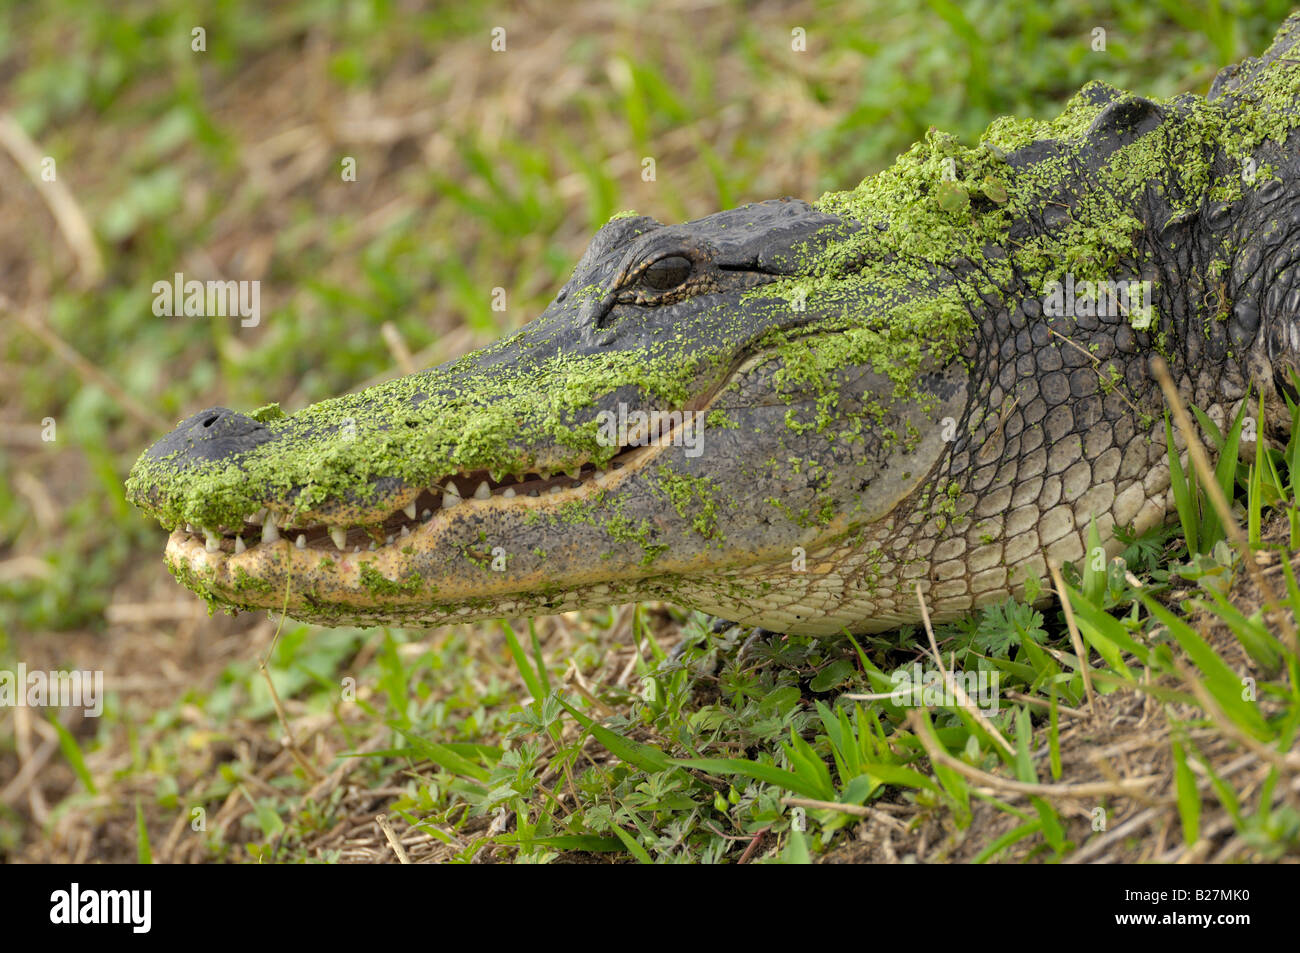 American Alligator Paynes covered in duckweed, Paynes Prairie State Preserve, Florida Stock Photo